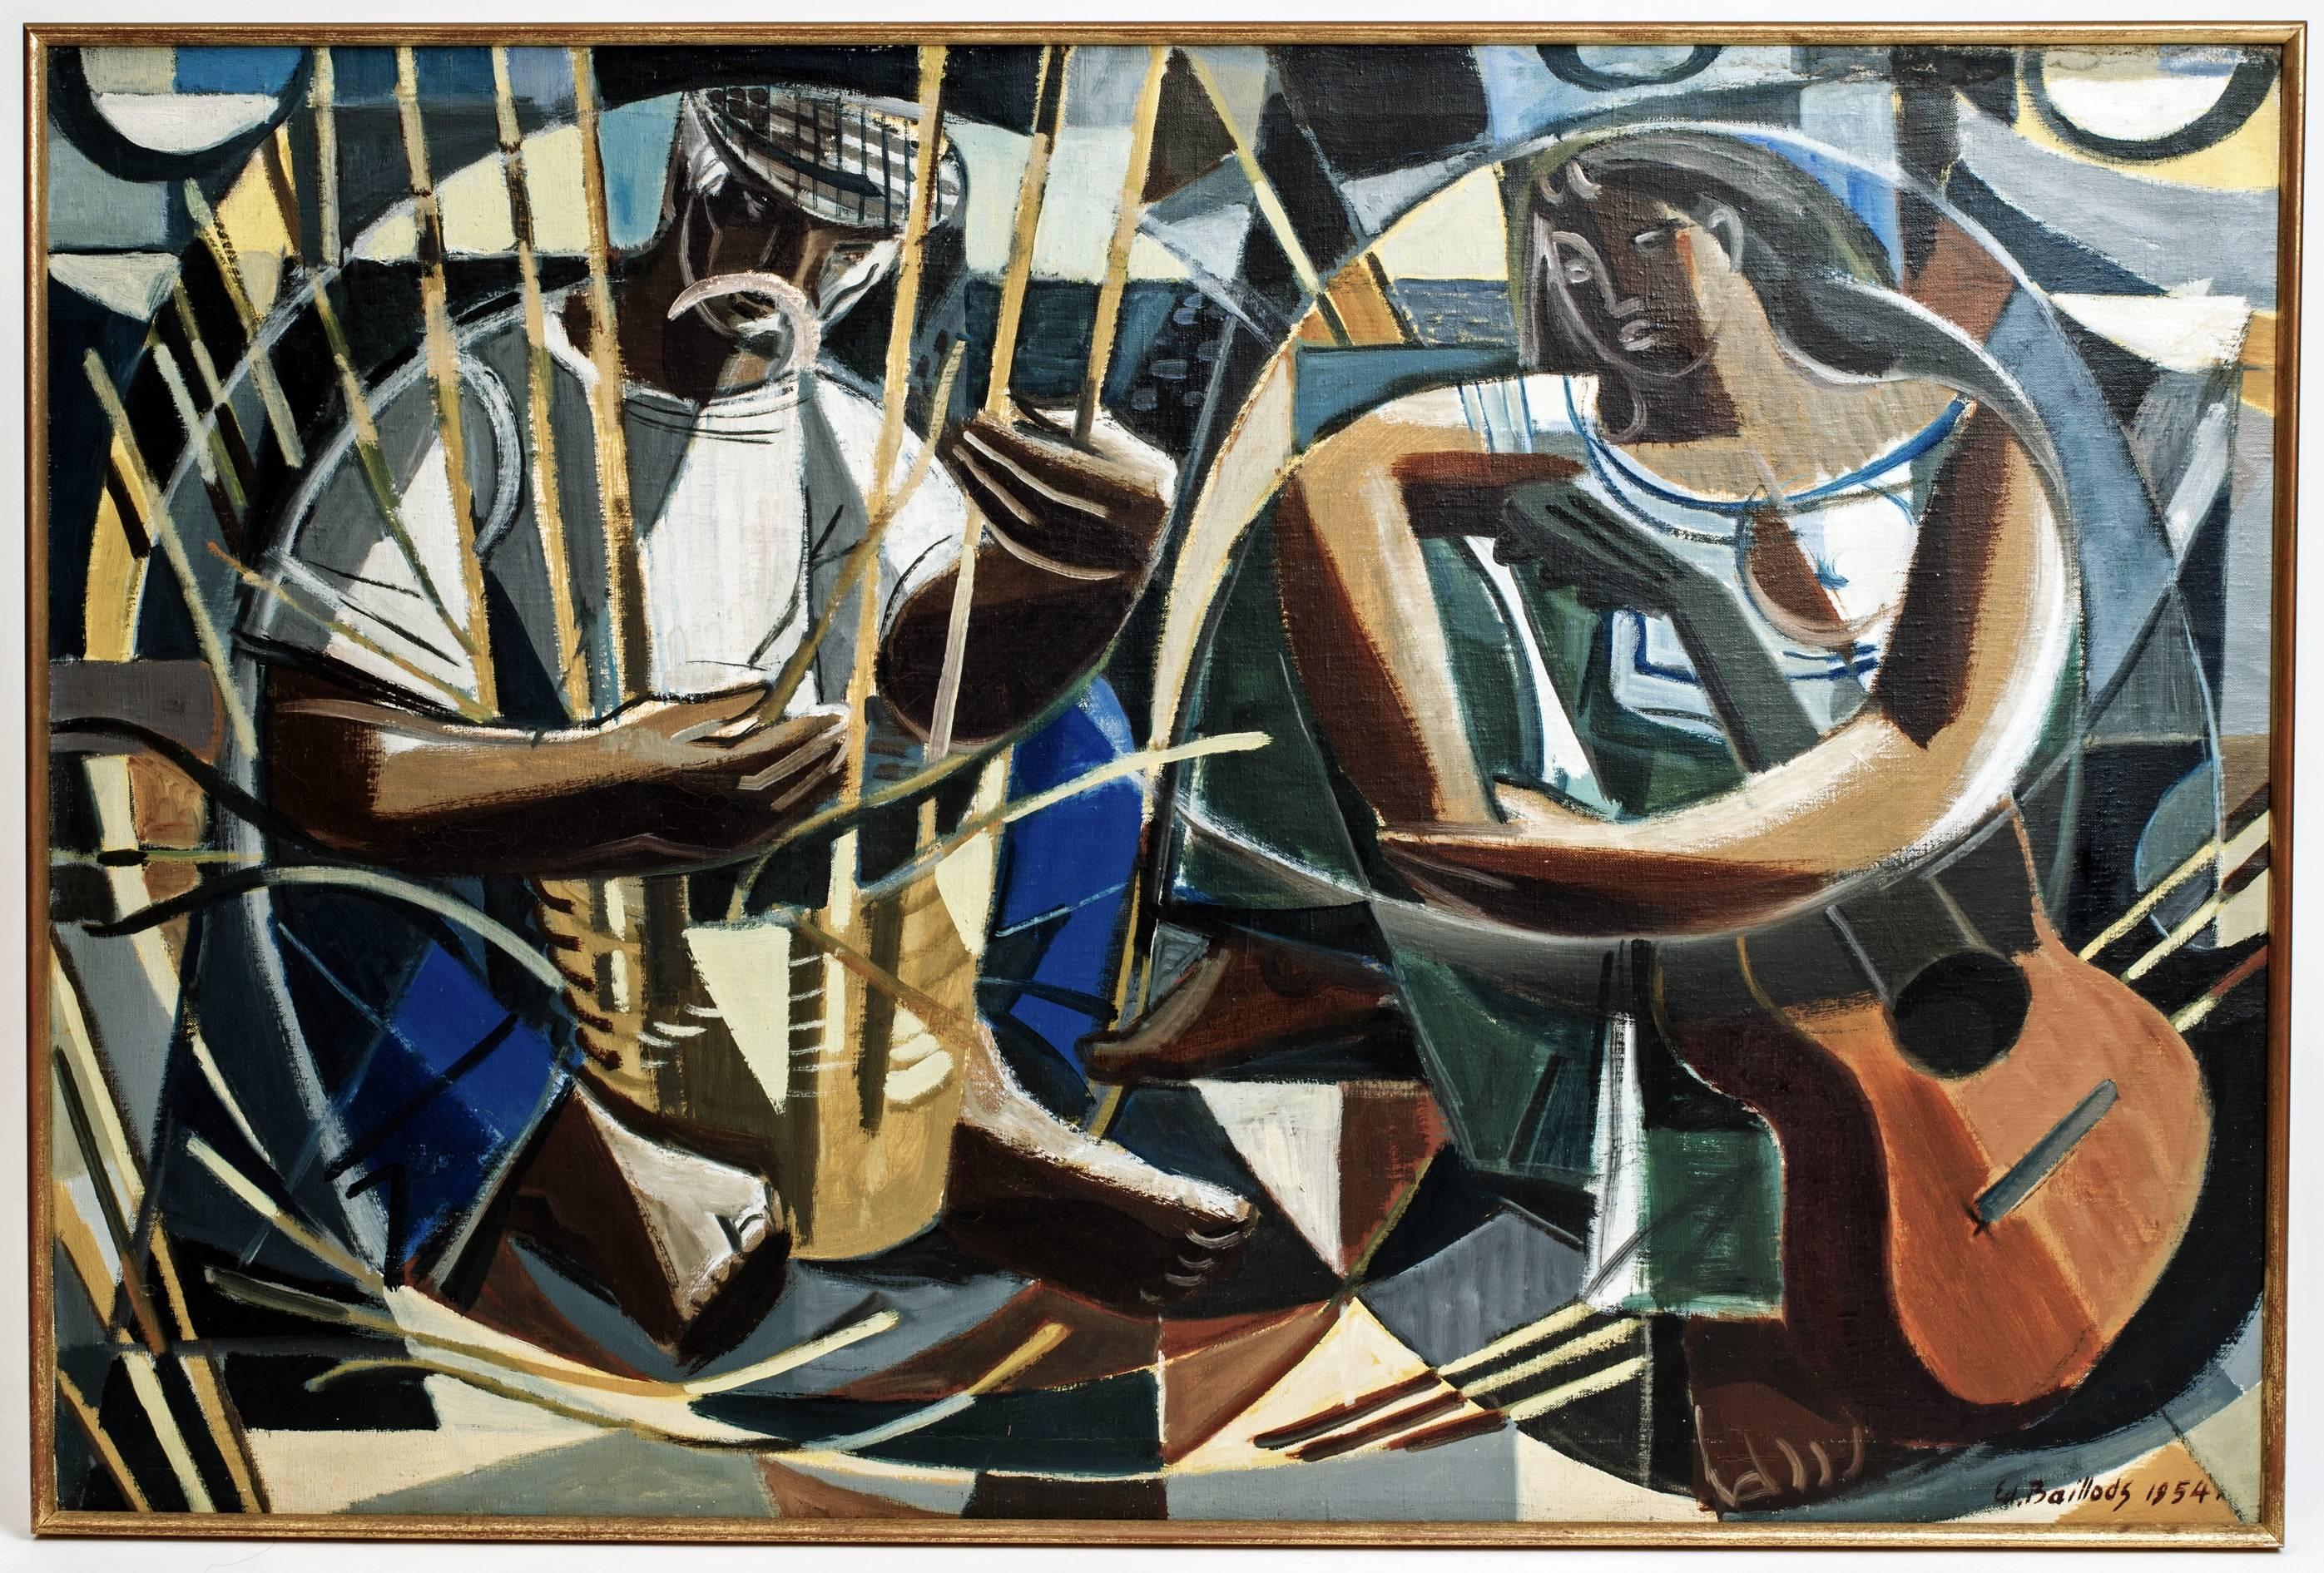 Pair of Edouard Baillods Fishermen paintings pair of fabulous cubist fishermen paintings by Swiss artist Edouard Baillods (1918-1988) consisting of two fishermen with fish and ropes and a second painting of a sitting fisherman with nets and a girl